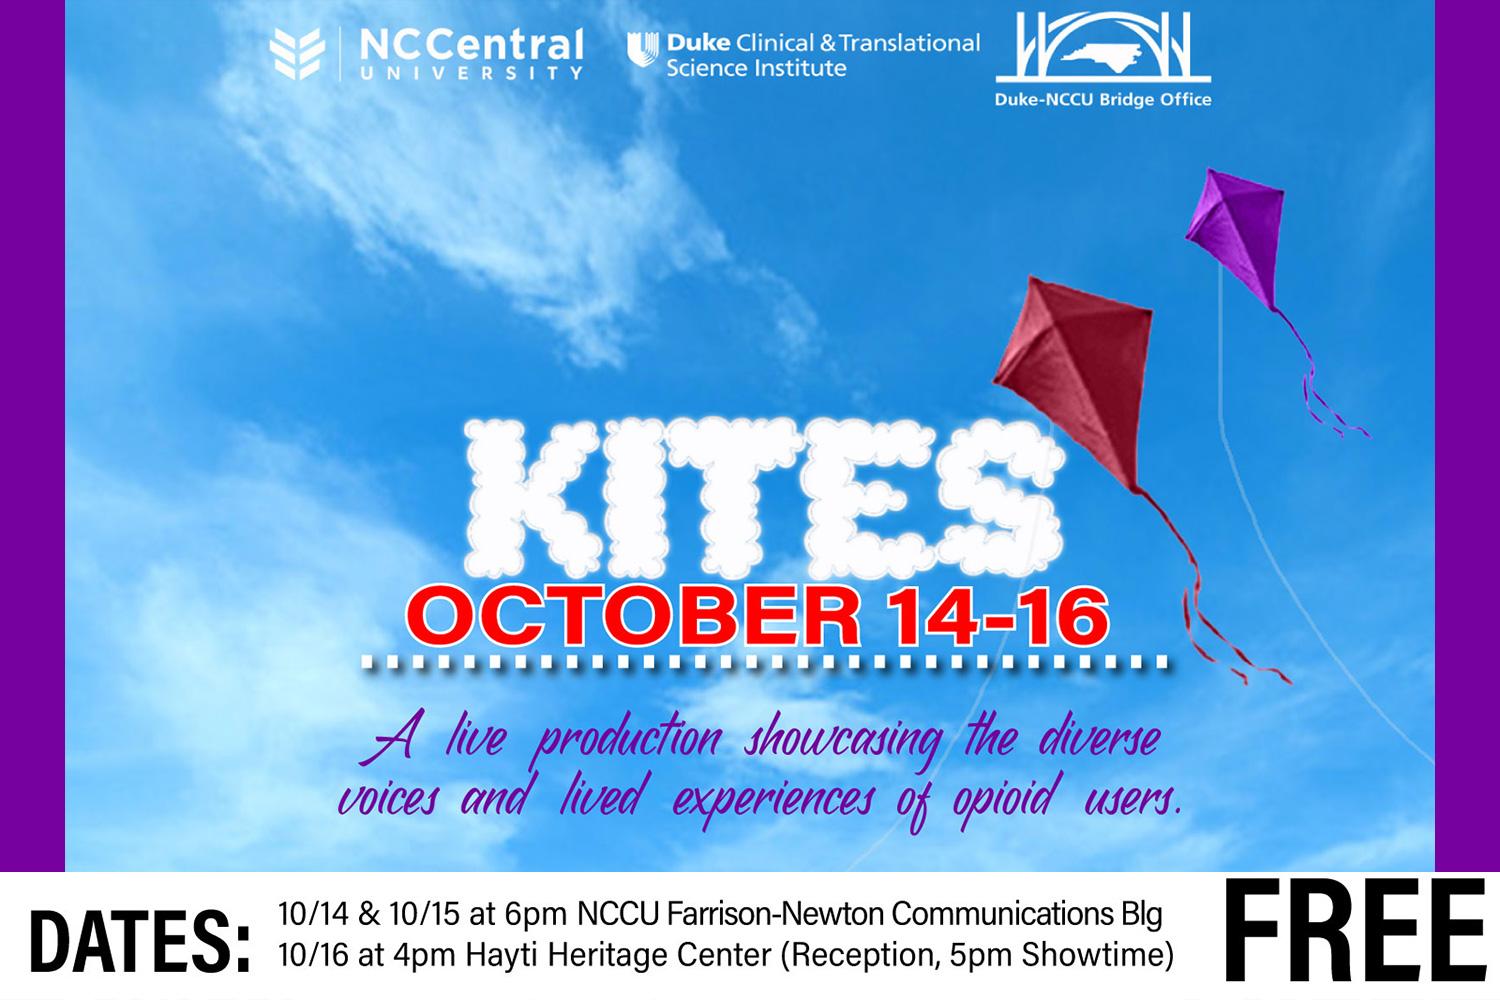 NC Central University, Duke Clinical &amp;amp;amp;amp;amp;amp;amp;amp;amp; Translational Science Institute, Duke-NCCU Bridge Office, KITES October 14-16, A live production showcasing the diverse voices and lived experiences of opioid users. DATES: 10/14 &amp;amp;amp;amp;amp;amp;amp;amp;amp; 10/15 at 6pm NCCU Farrison-Newton Communications Blg, 10/16 at 4pm Hayti Heritage Center (Reception, 5pm Showtime) FREE